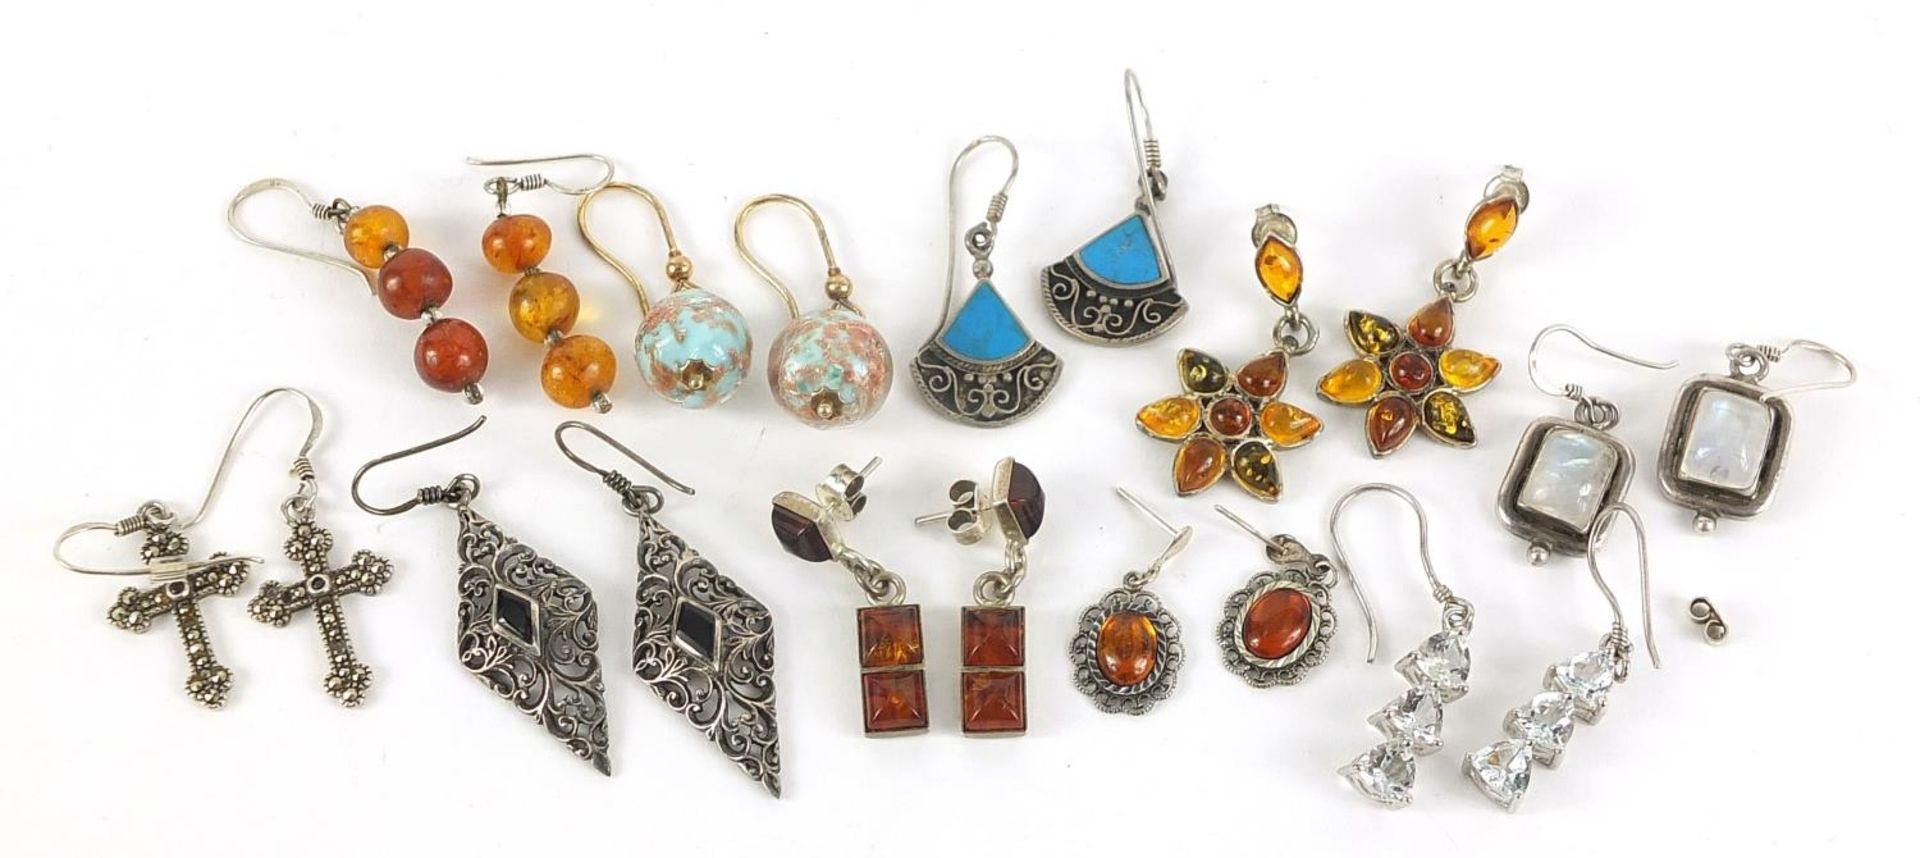 Ten pairs of earrings, some silver, set with semi precious stones including amber, moonstone and